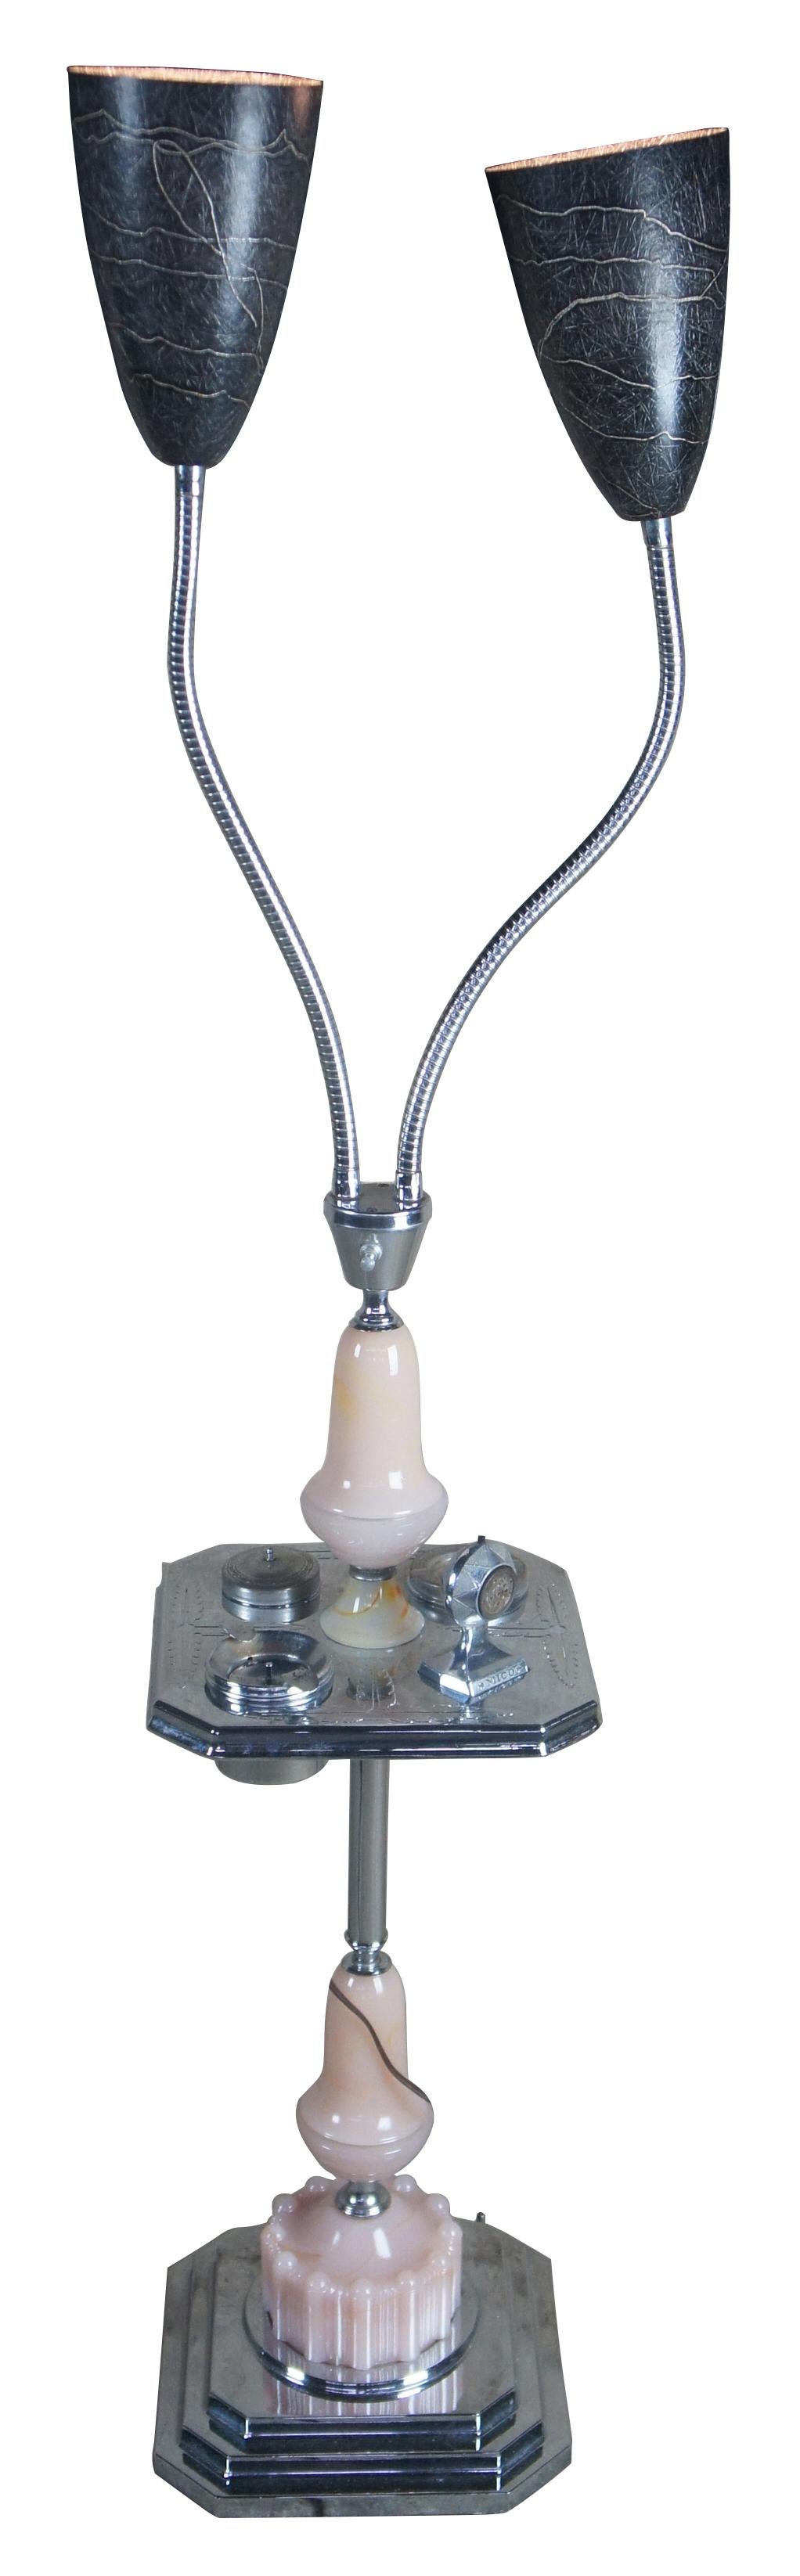 Art Deco pink glass chrome smoking table adjustable lights floor lamp ashtray

Chaplick MFG Company Art Deco smoke stand with adjustable lights. Features an ashtray, cigarette holder and lighter. Made from glass and chrome.